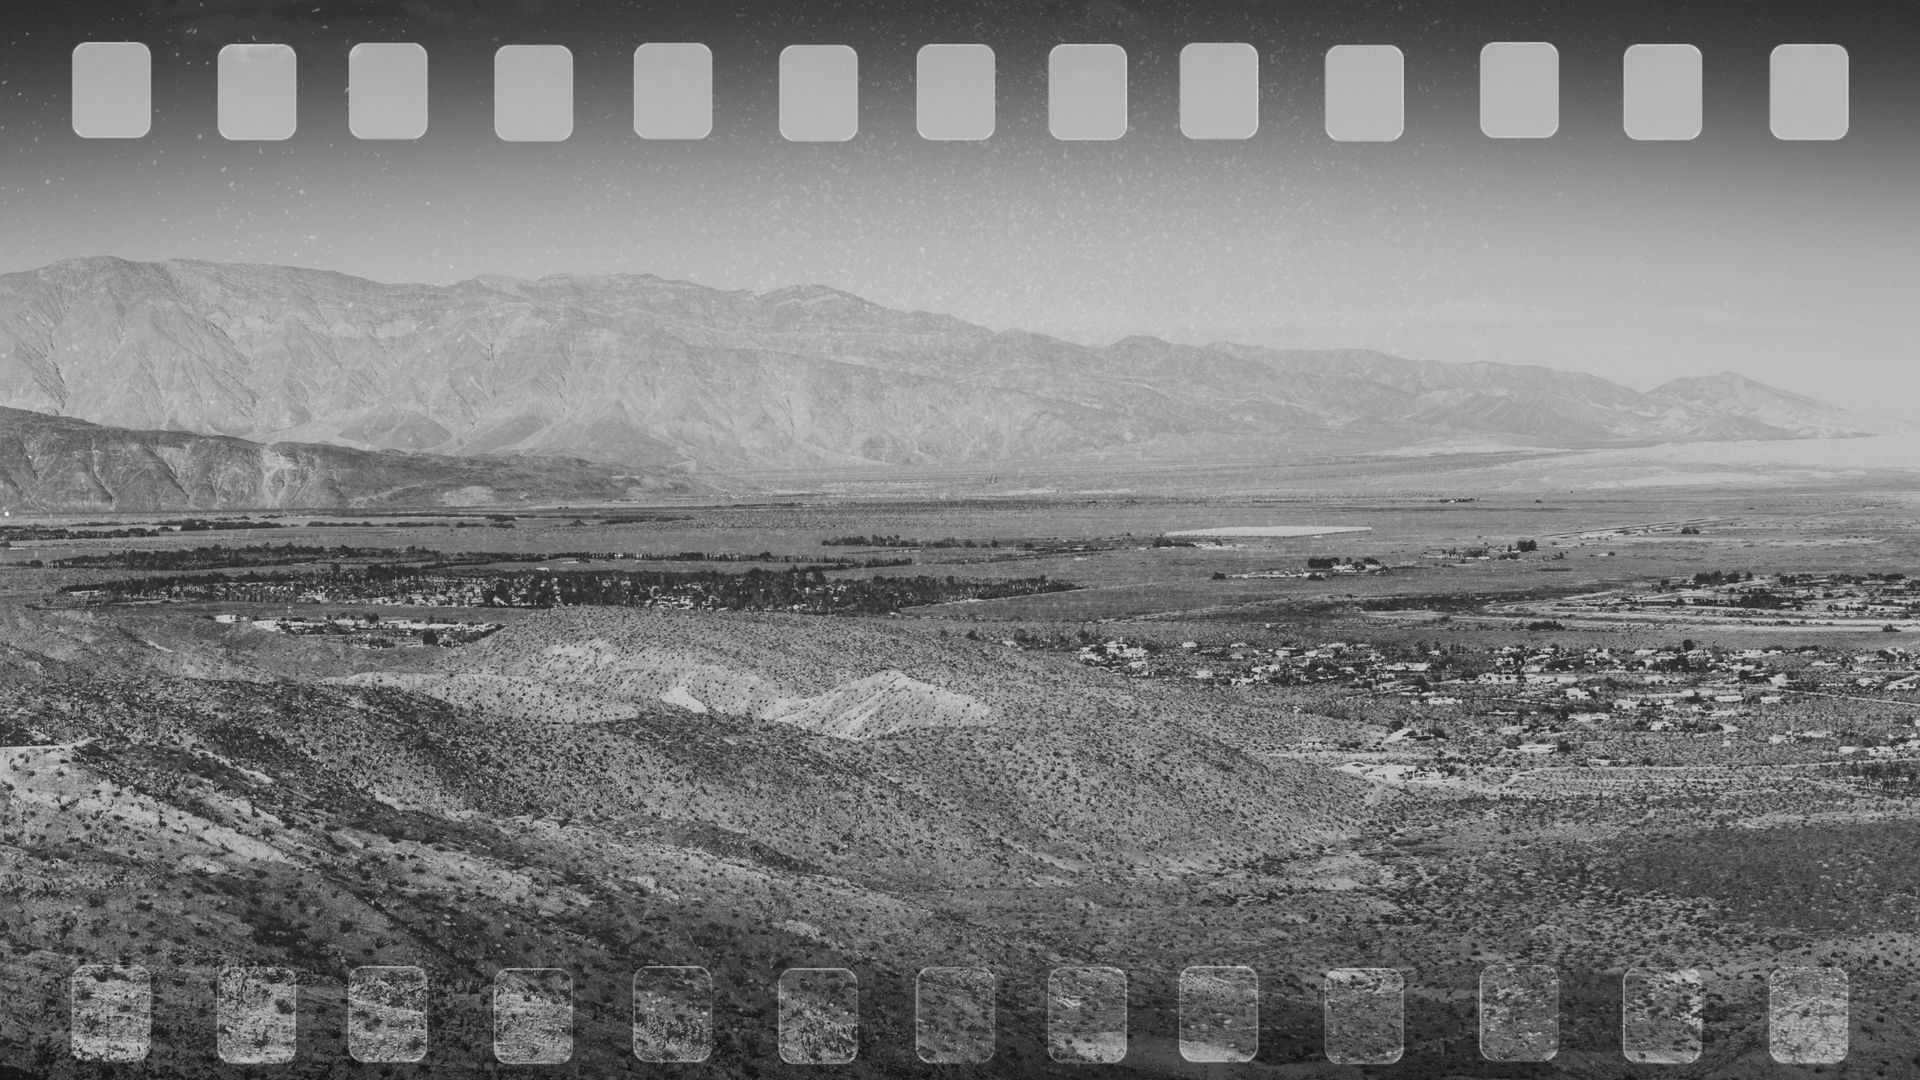 Film History in Borrego: Fred Jee